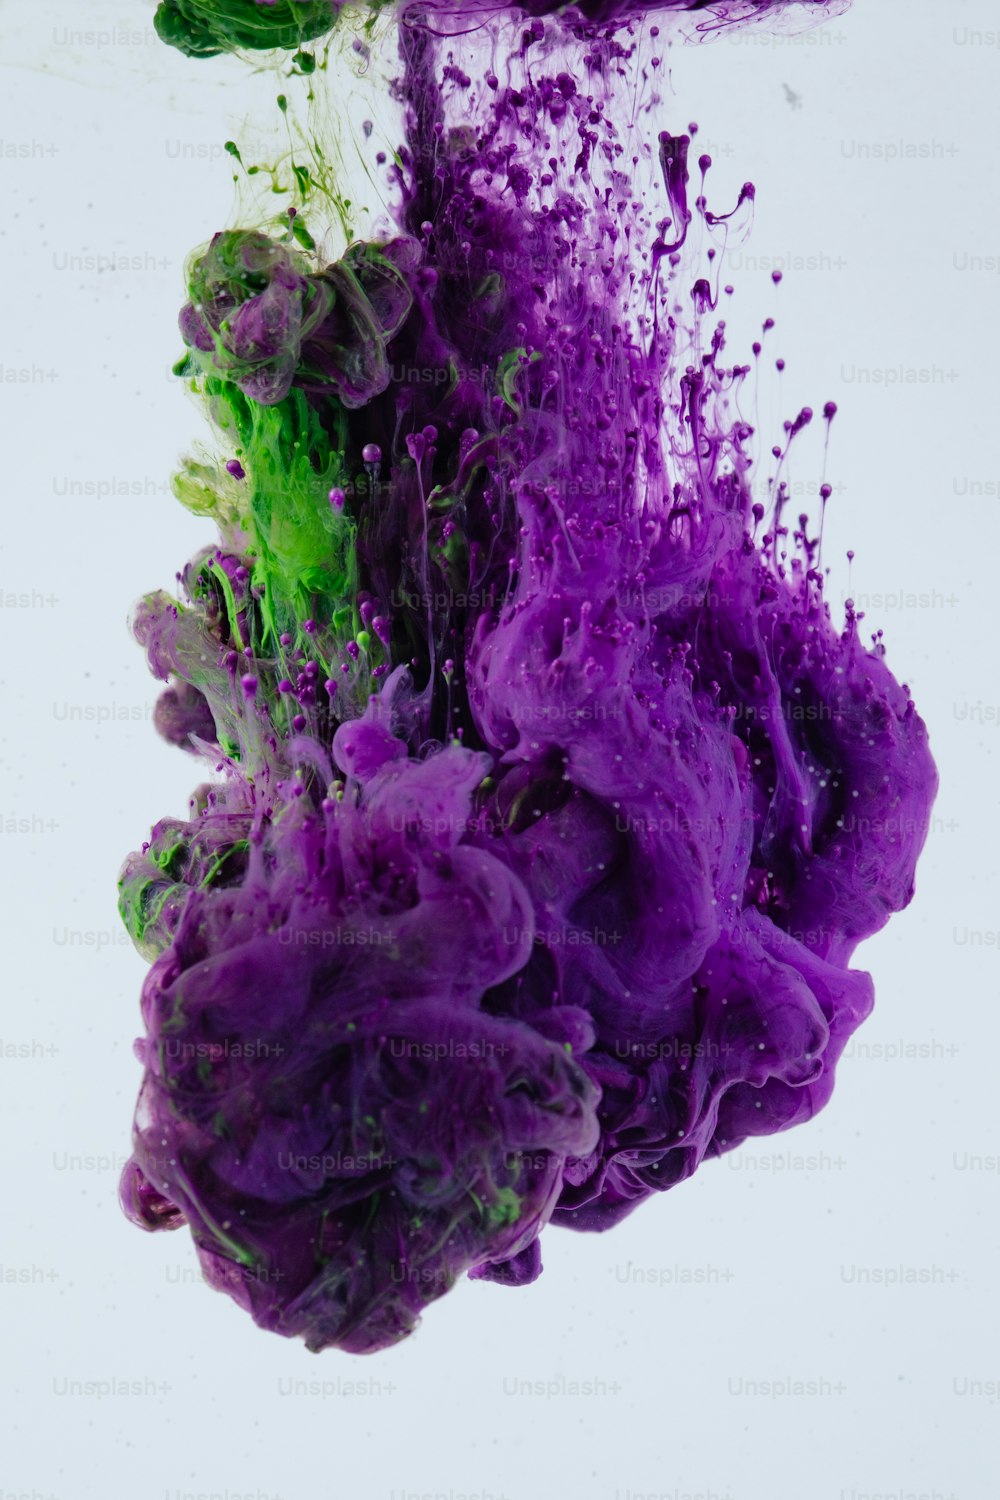 a purple and green substance floating in water